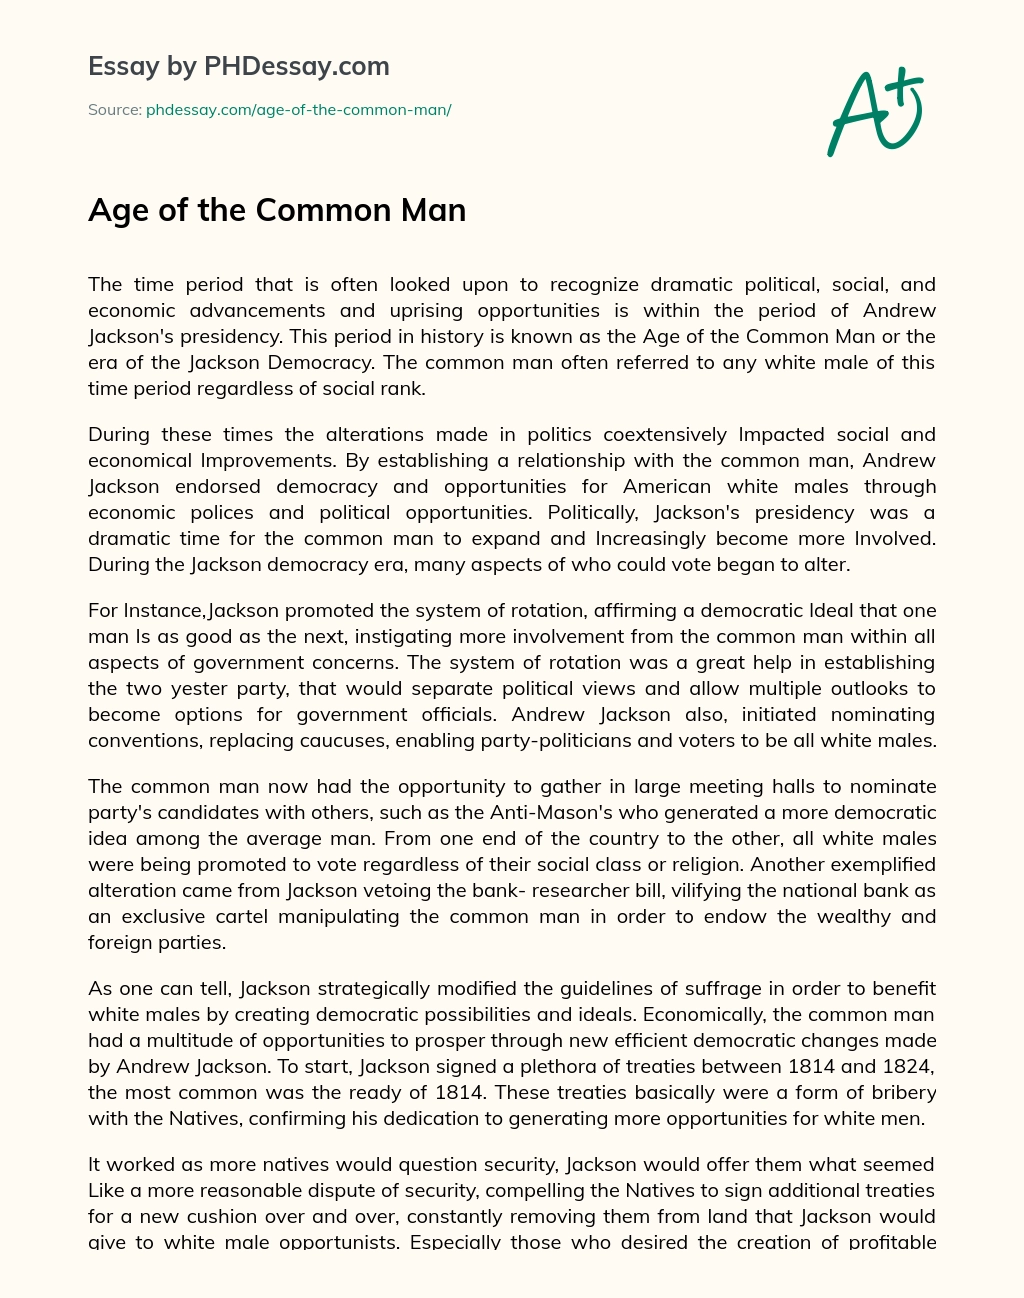 Age of the Common Man essay